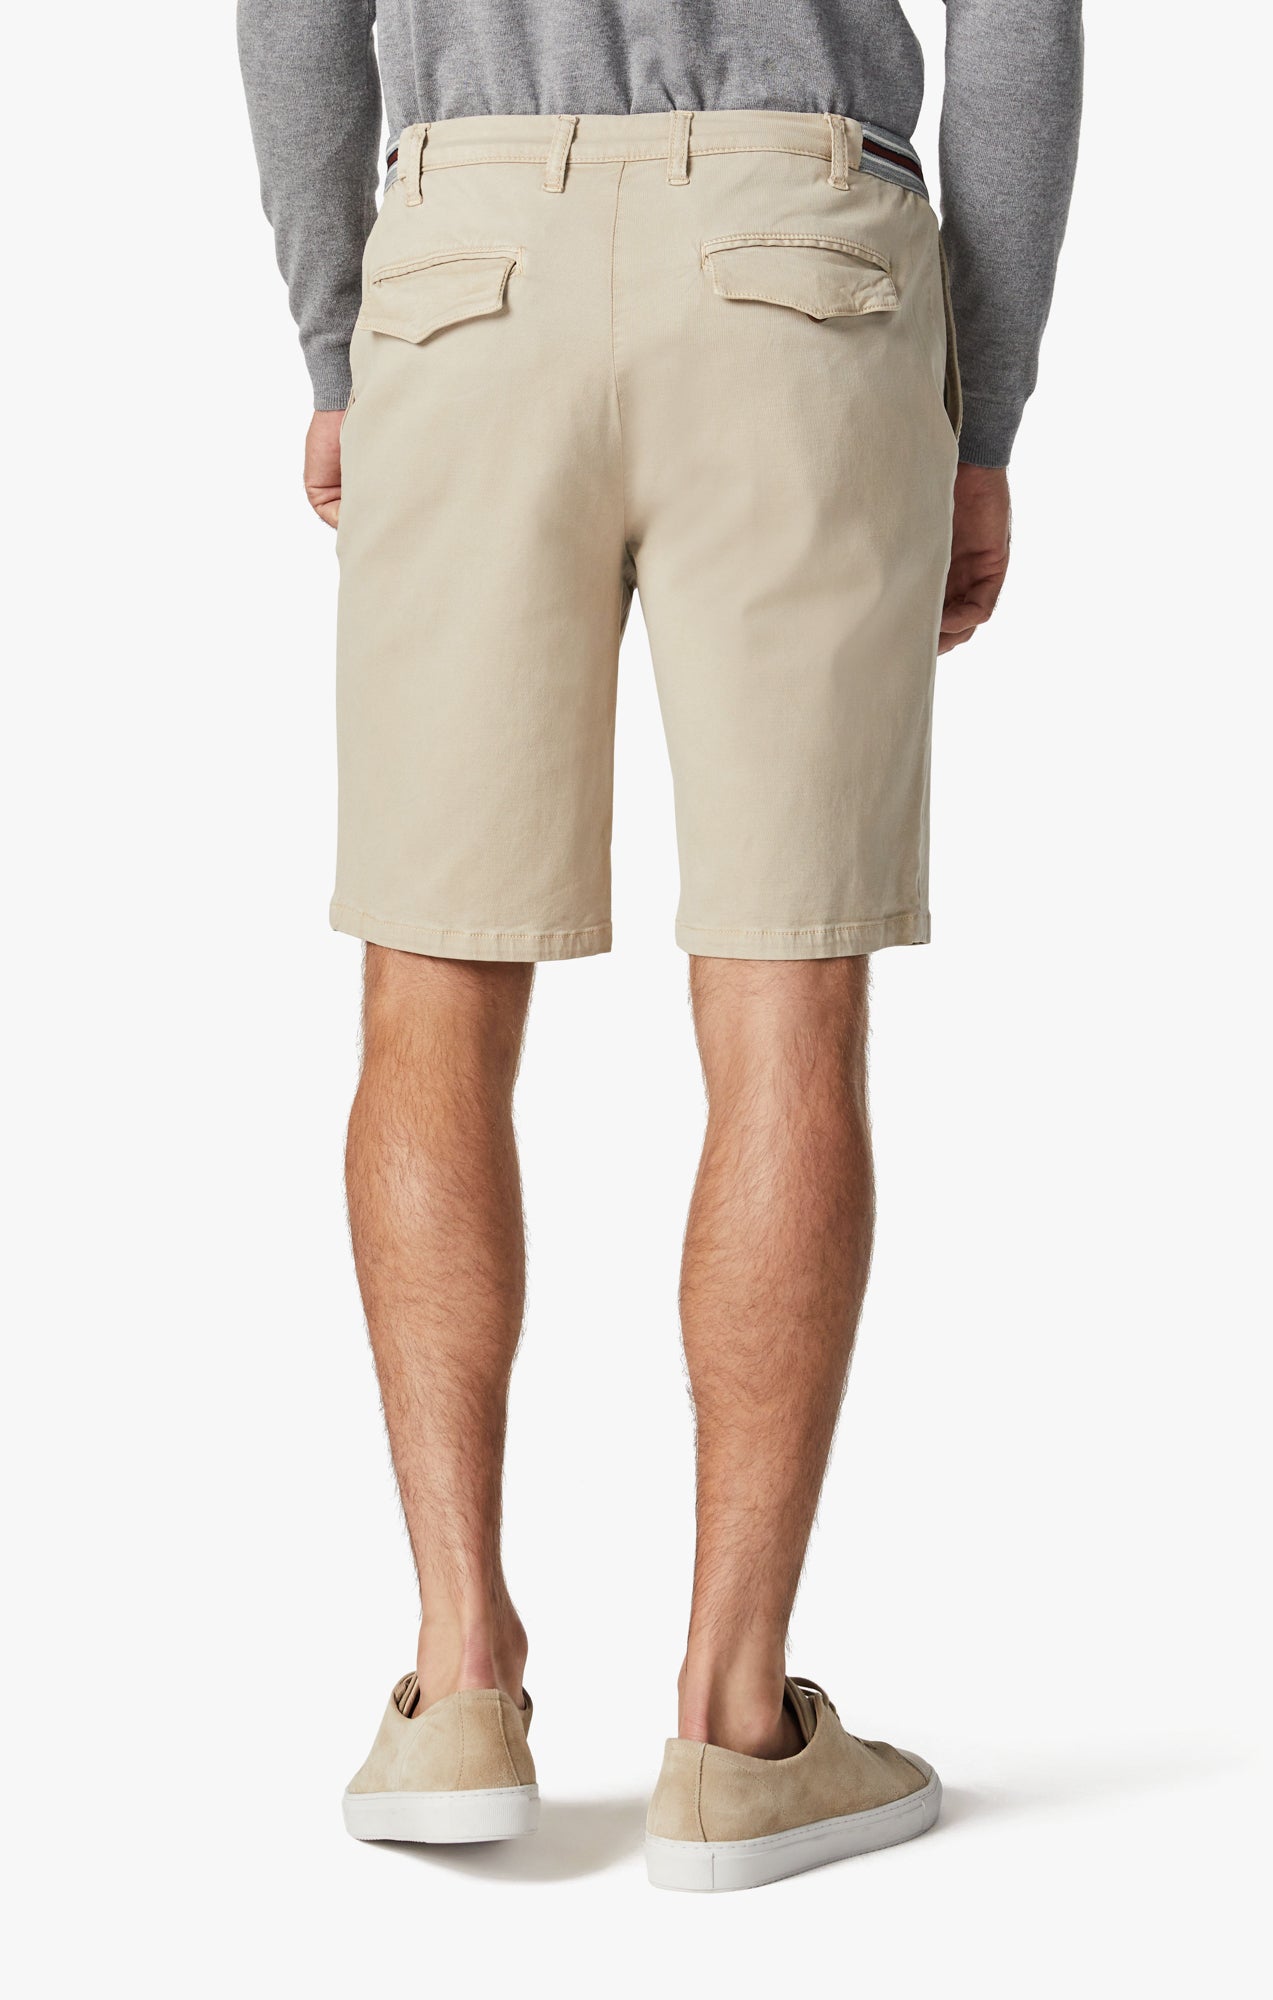 Ravenna Drawstring Shorts In Sand Soft Touch Image 5